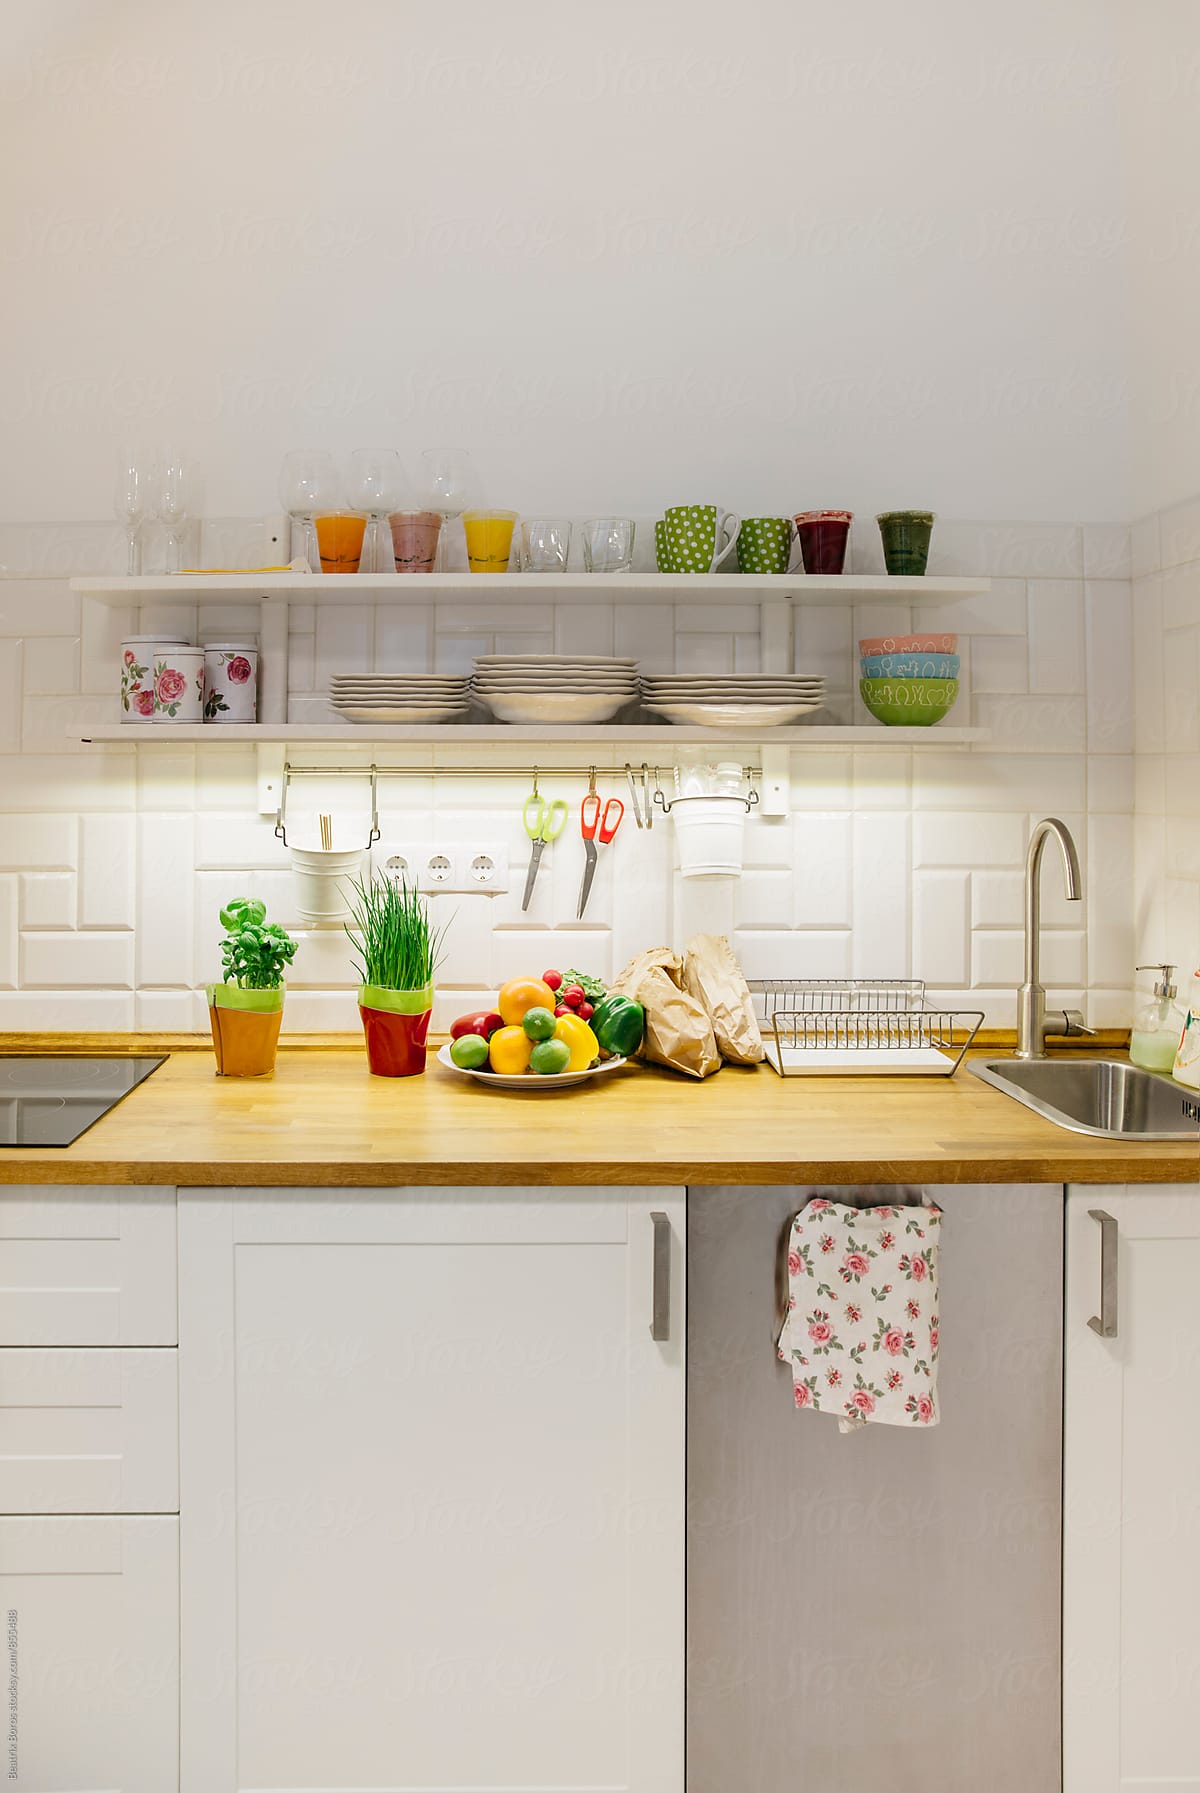 Vertical photo of a small kitchen with raw fruits and veggies on the counter